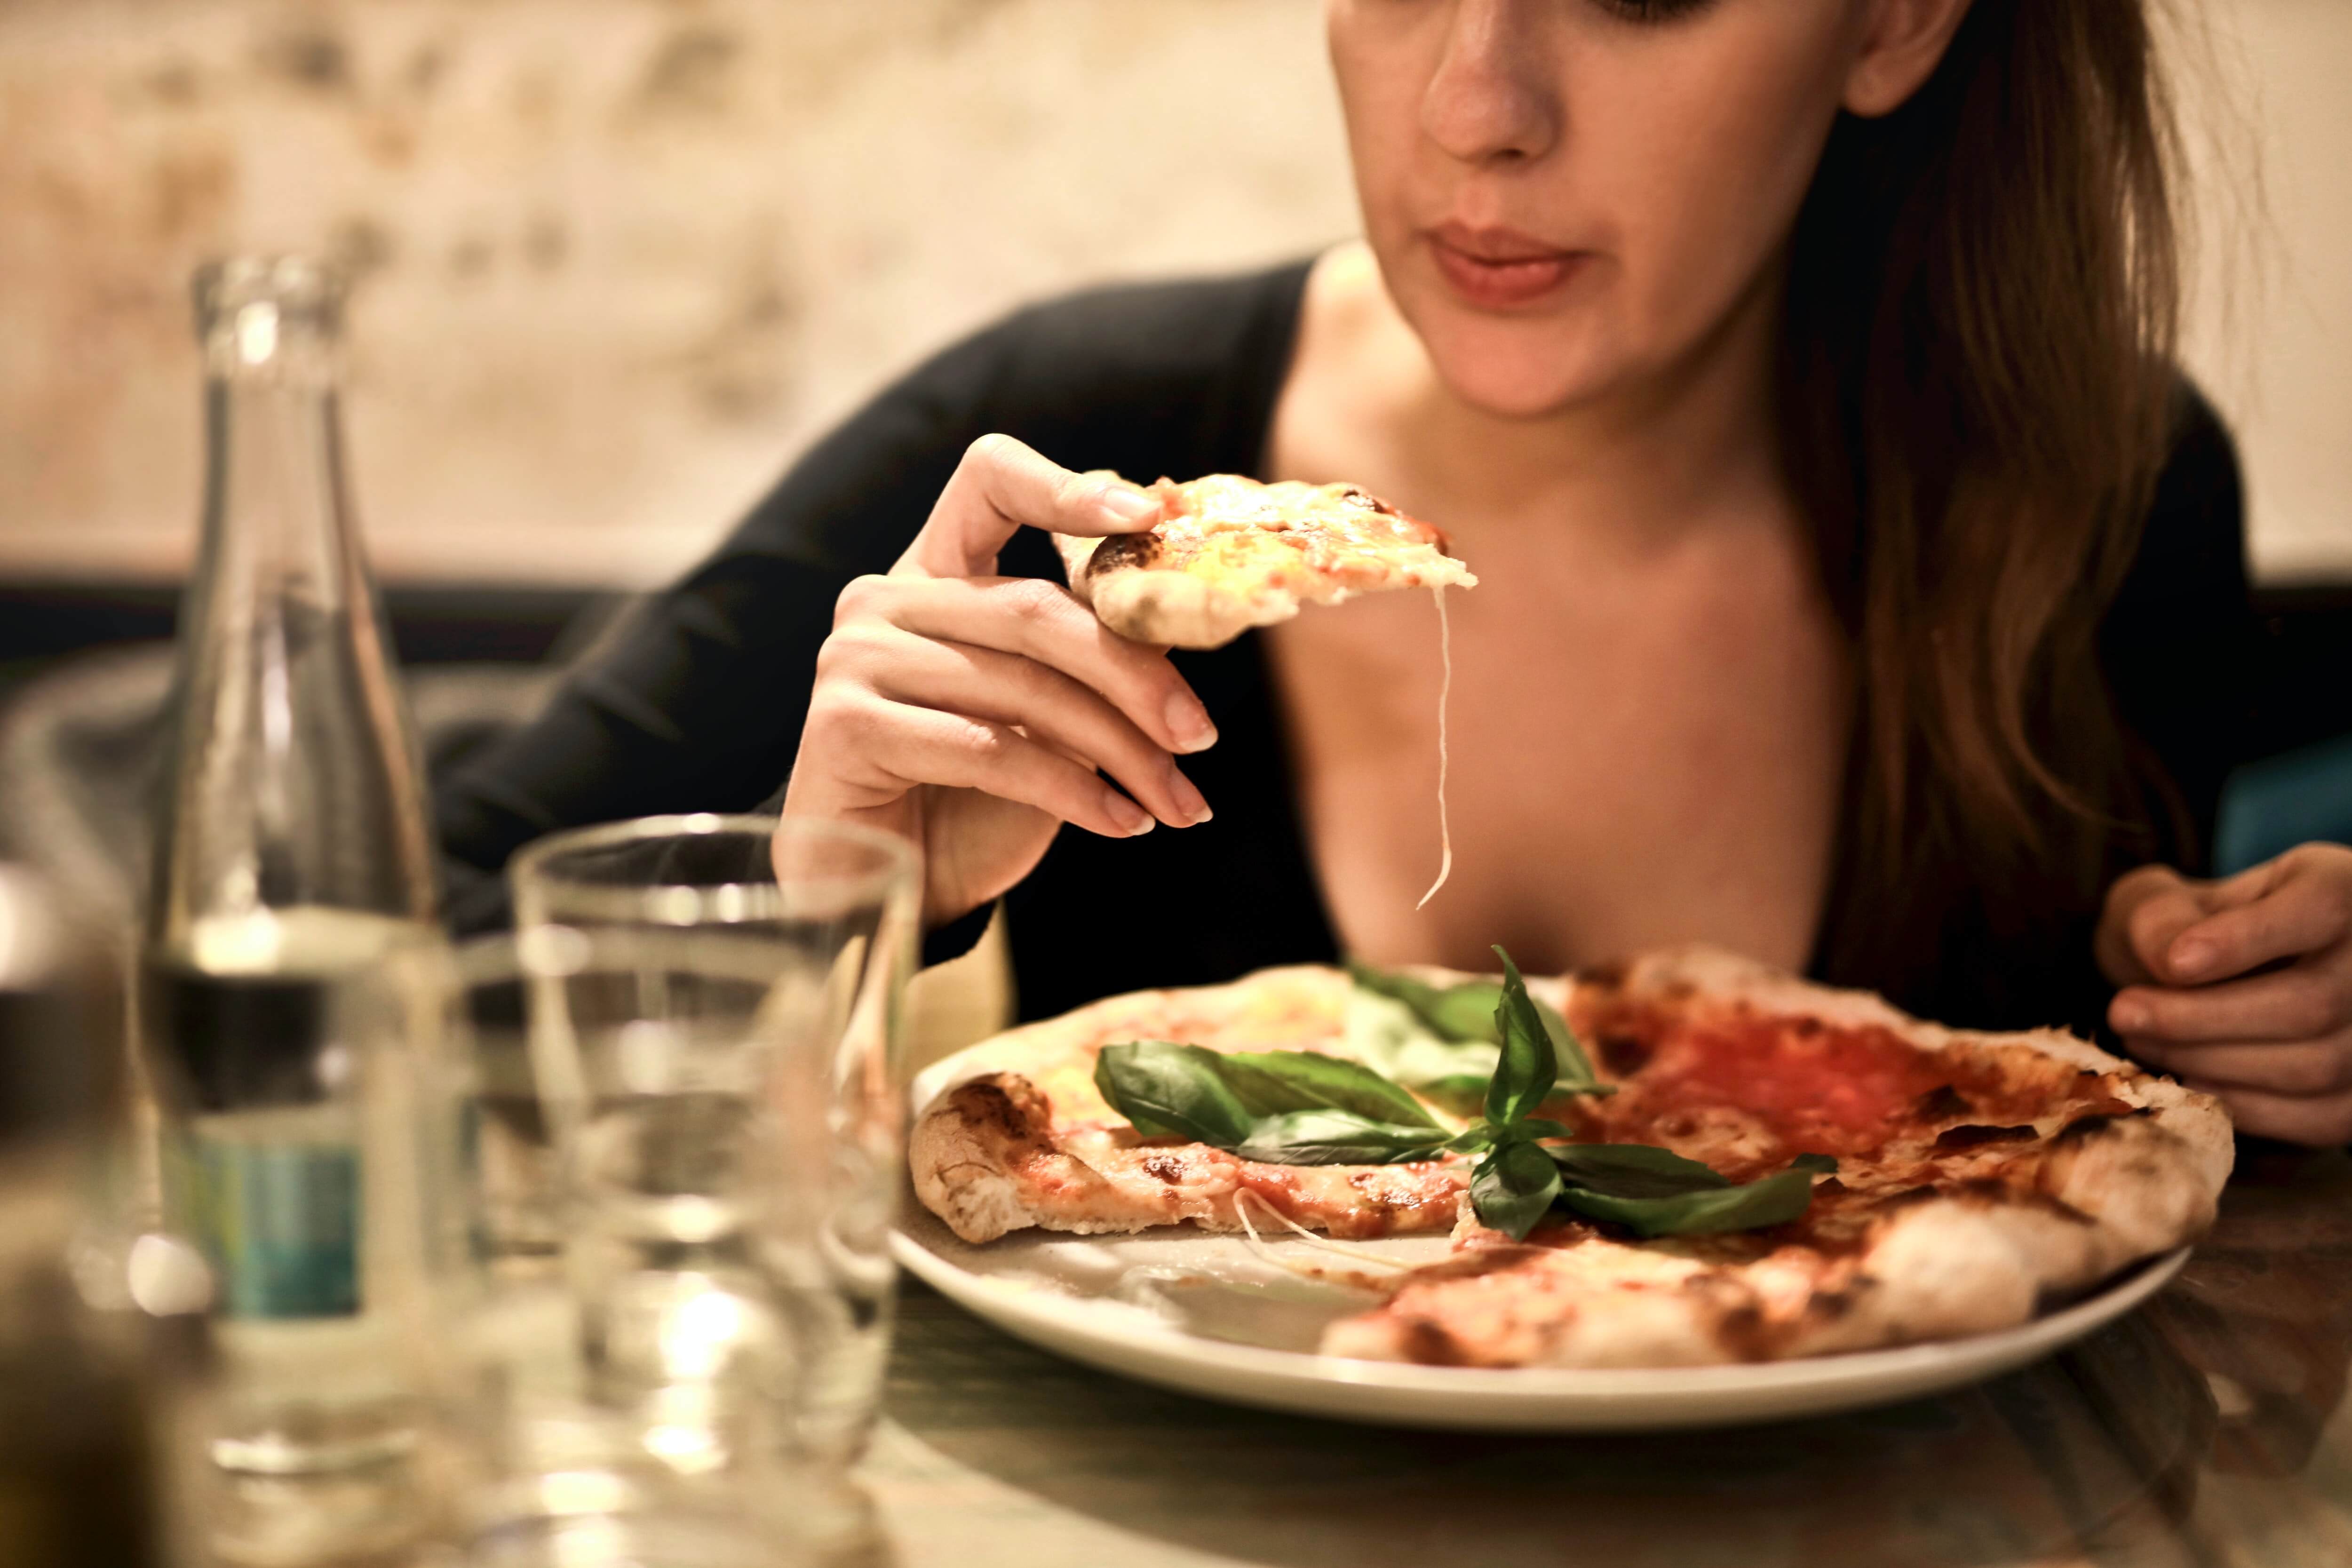 woman-holds-sliced-pizza-seats-by-table-with-glass-723031.jpg